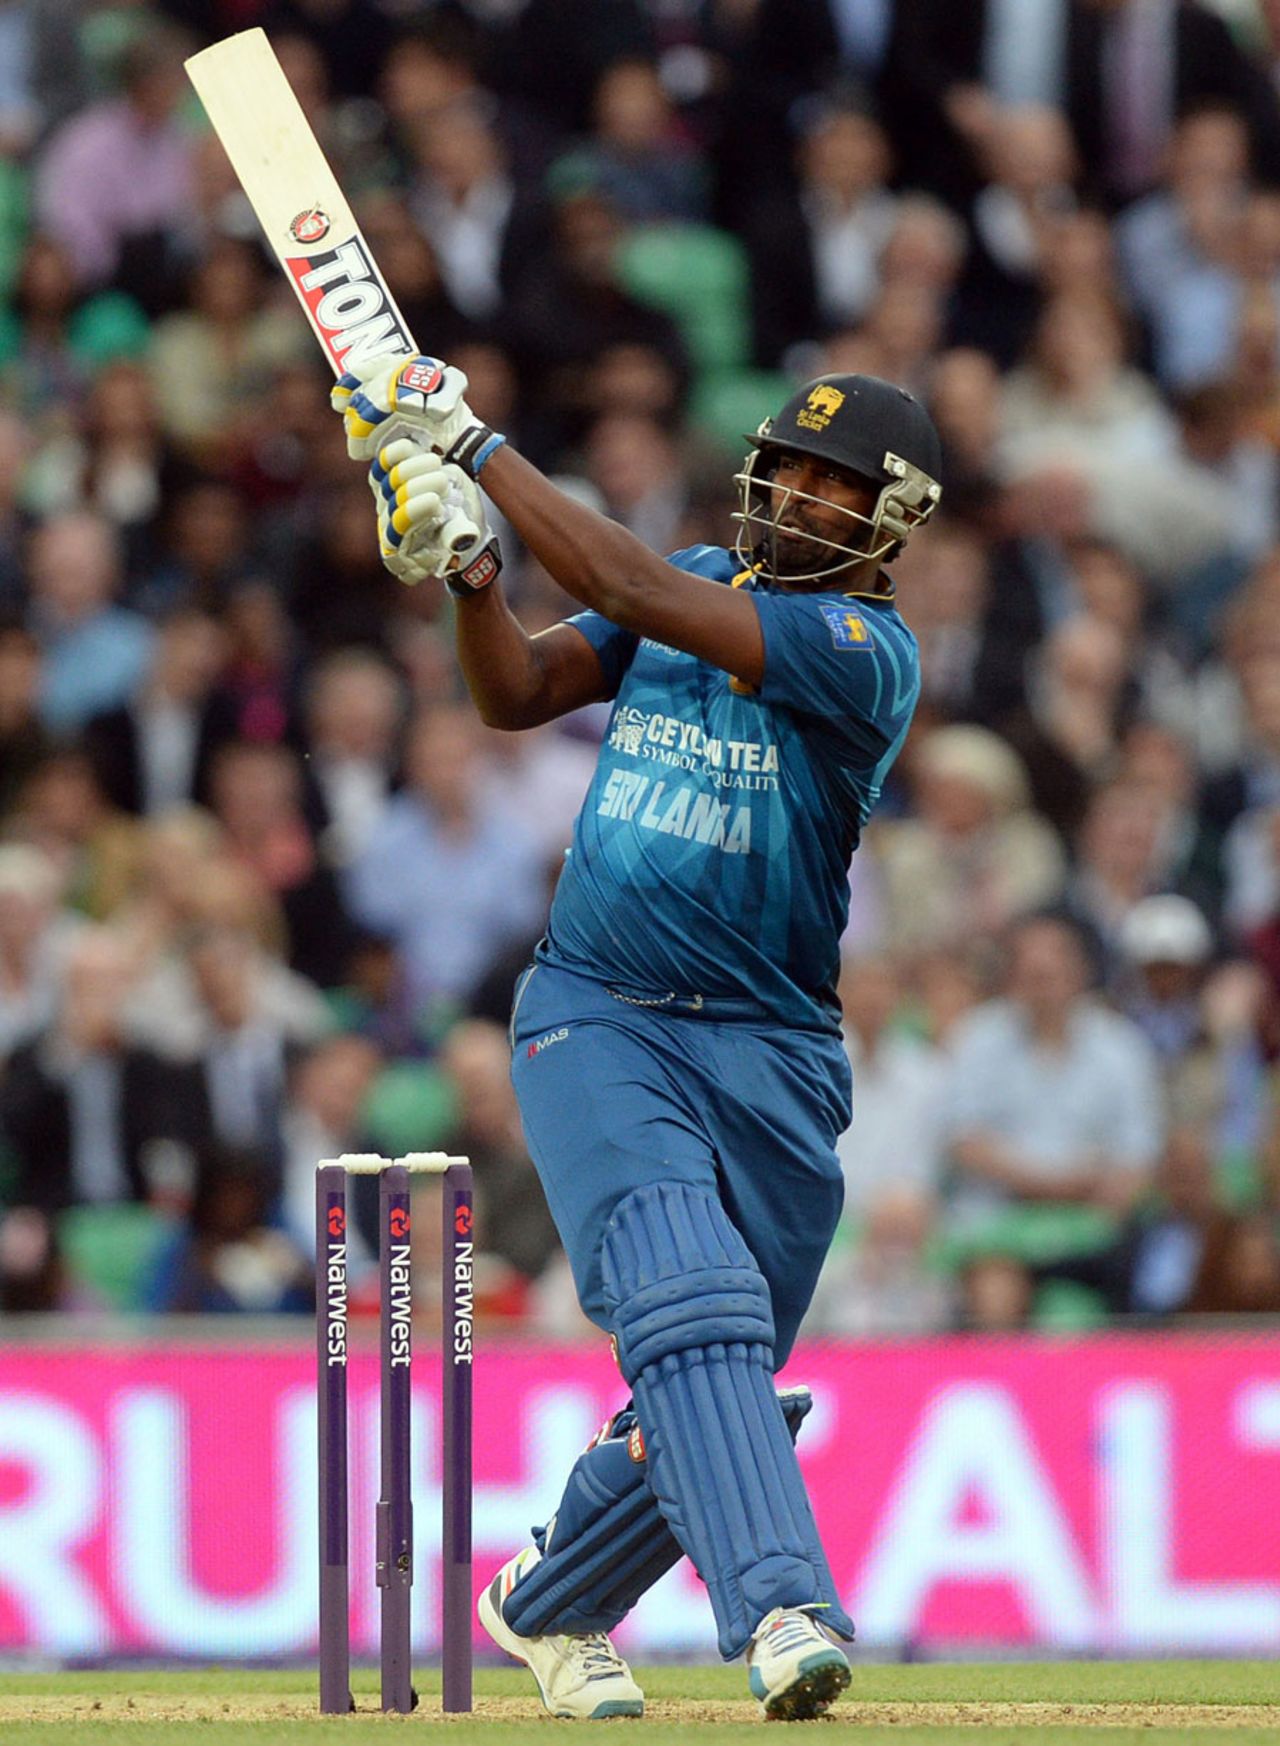 Thisara Perera struck to good effect at the end of the innings, England v Sri Lanka, T20, The Oval, May 20, 2014